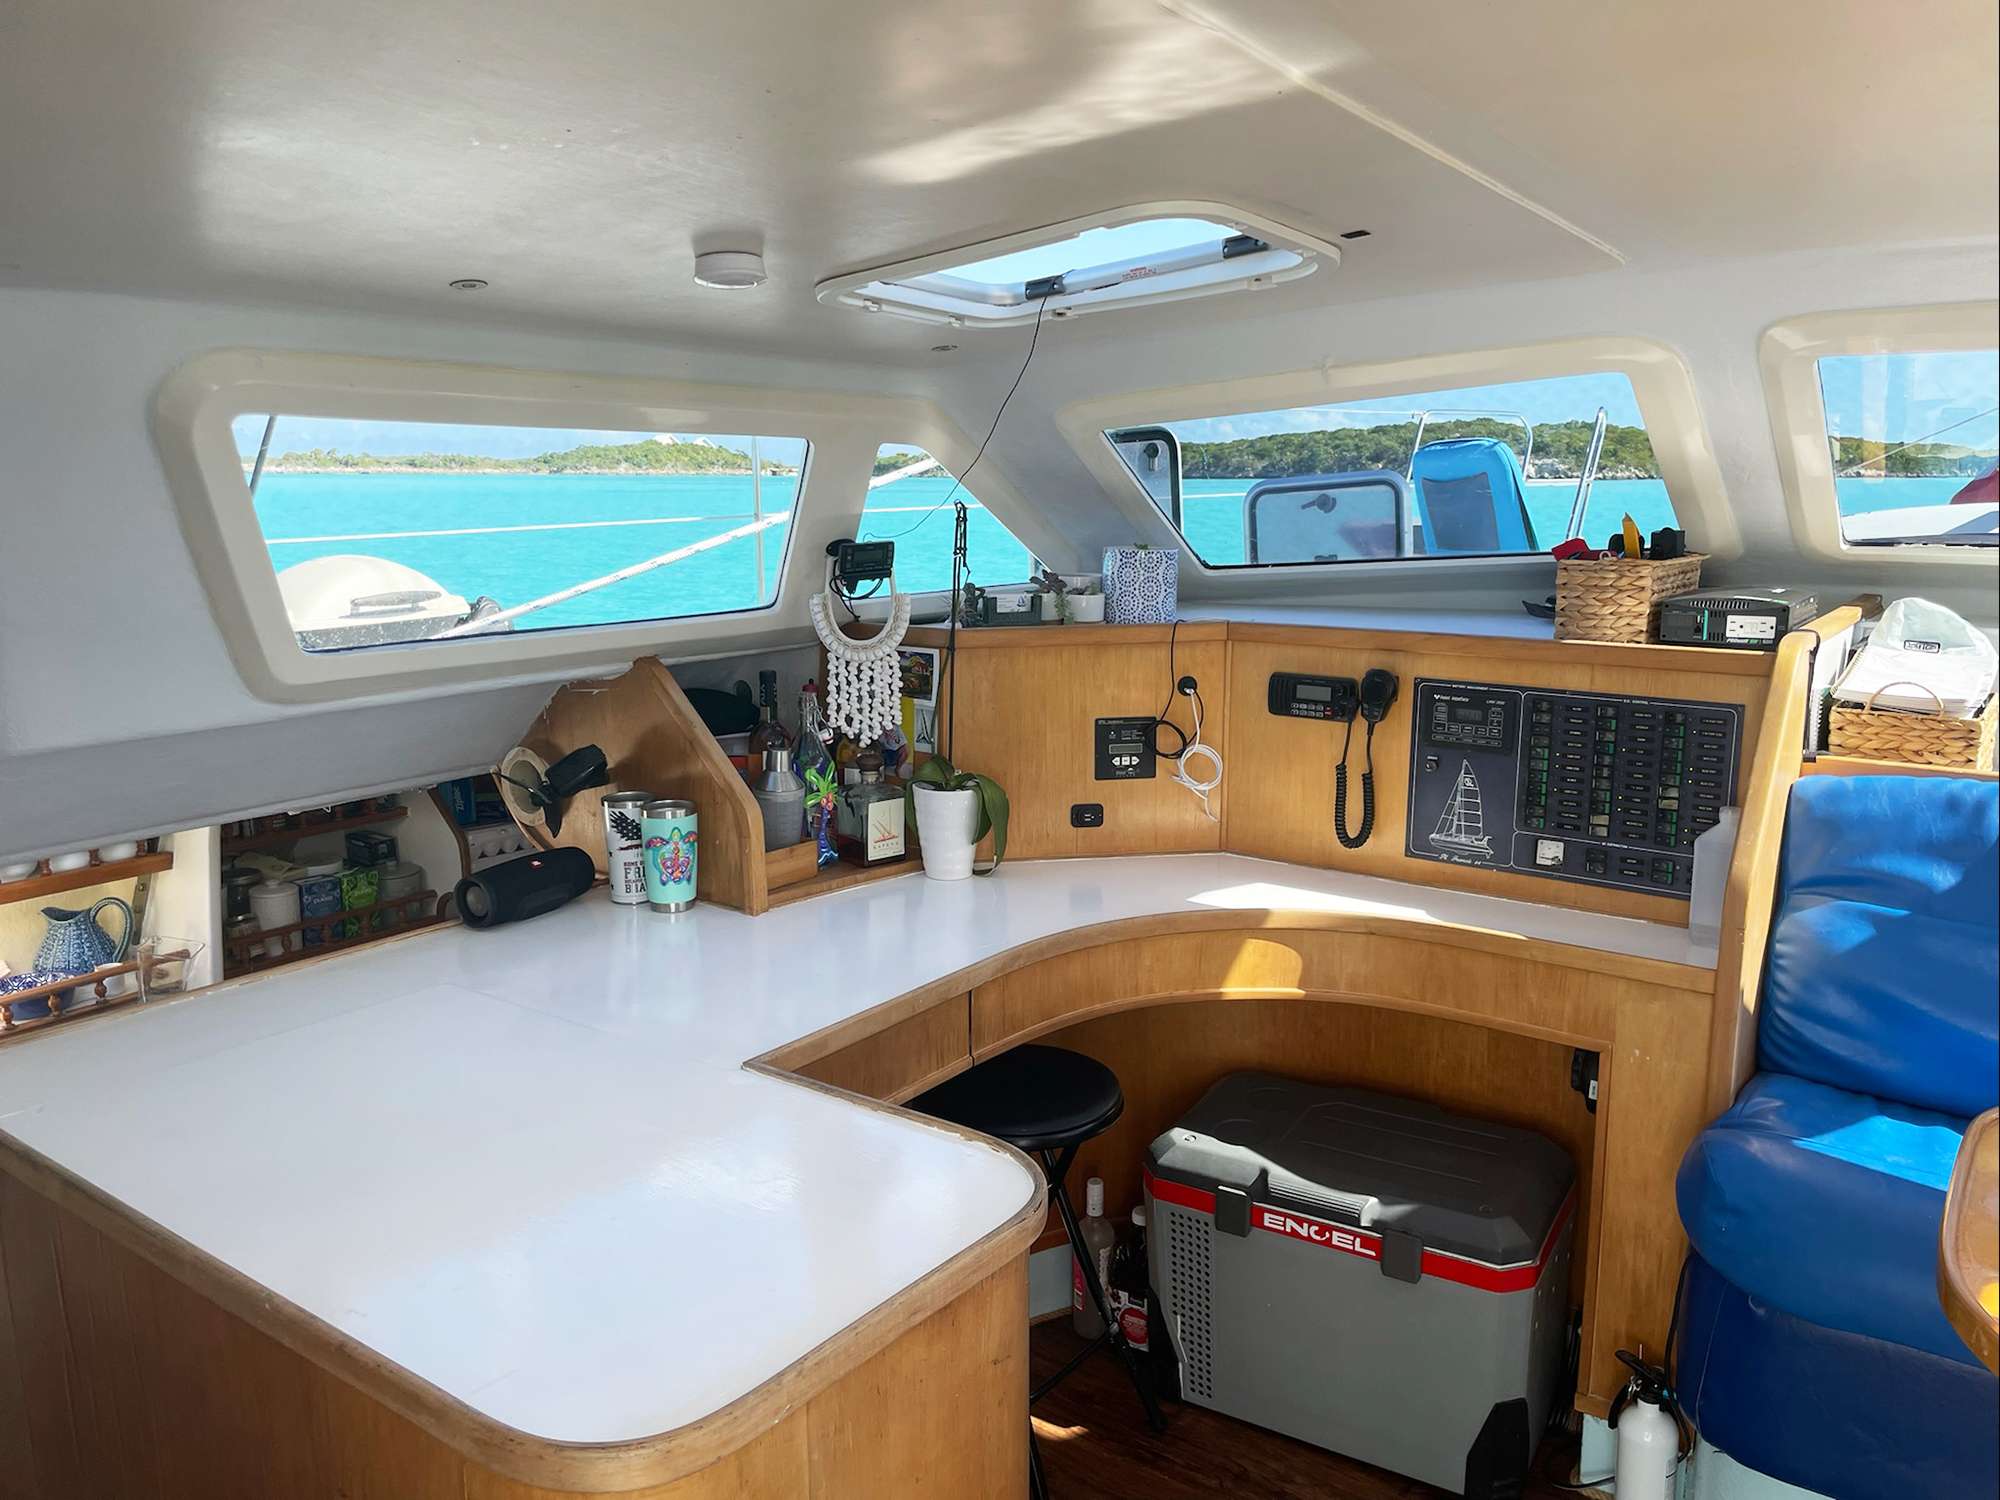 Catamaran Yacht 'RUBICON' Nav Station, 5 PAX, 2 Crew, 44.00 Ft, 13.00 Meters, Built 1997, St. Francis, Refit Year 2013 and Nov. 2015 when her sides, deck and cockpit sprayed with Awlgrip. partial refit January 2020 to include new hard floors throughout.